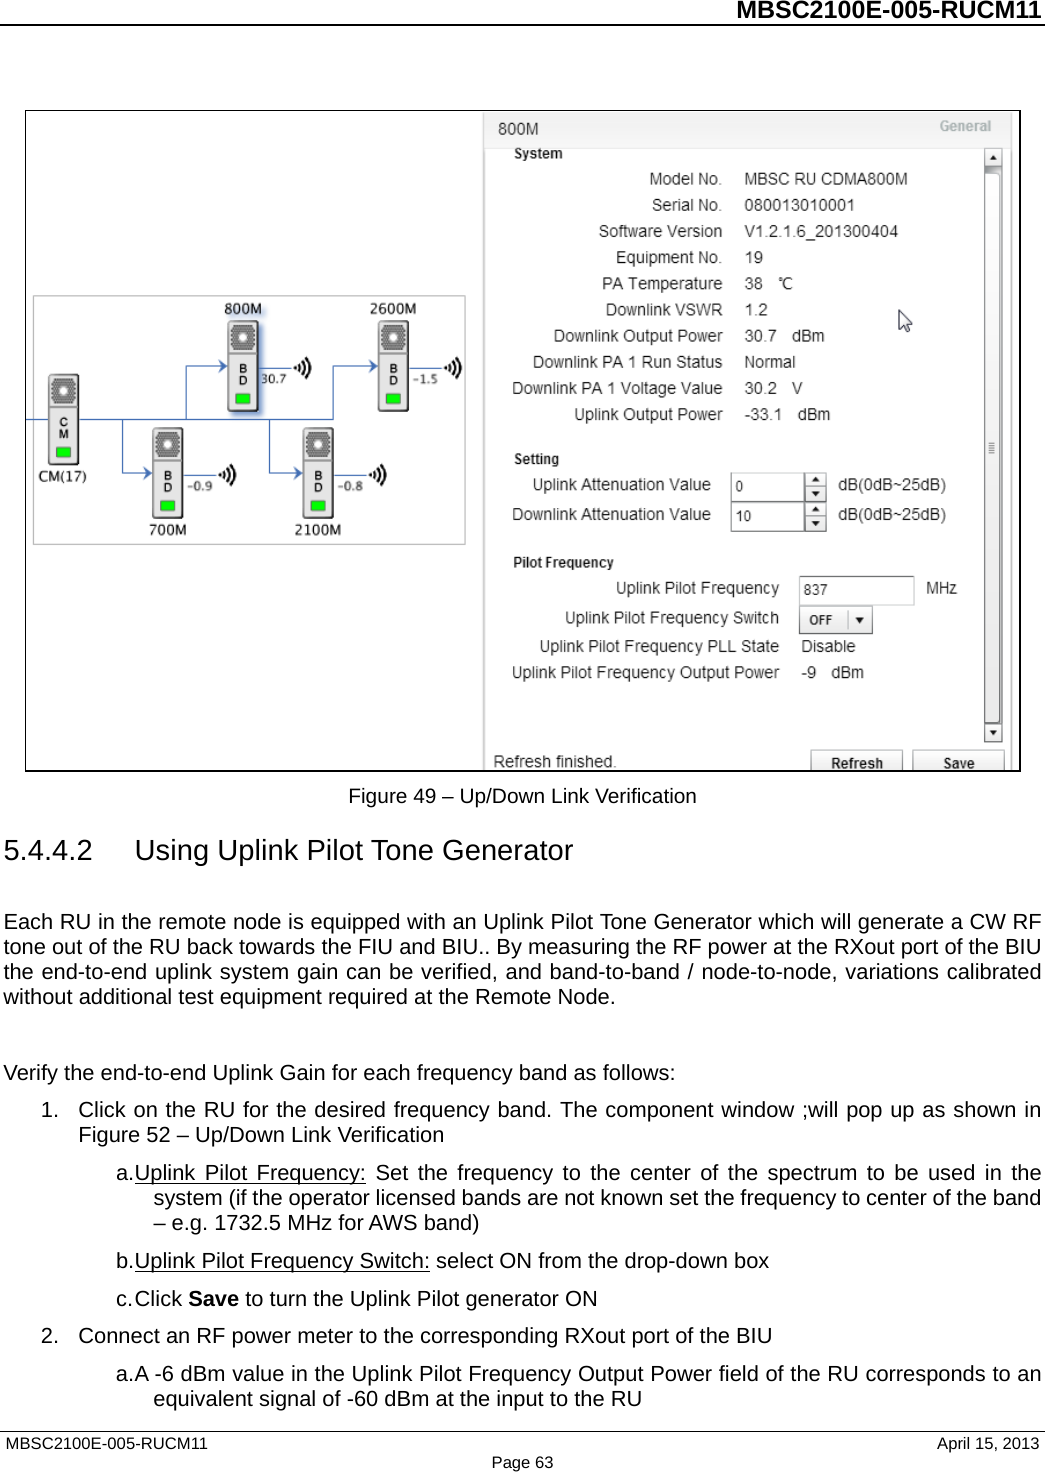          MBSC2100E-005-RUCM11    Figure 49 – Up/Down Link Verification 5.4.4.2 Using Uplink Pilot Tone Generator Each RU in the remote node is equipped with an Uplink Pilot Tone Generator which will generate a CW RF tone out of the RU back towards the FIU and BIU.. By measuring the RF power at the RXout port of the BIU the end-to-end uplink system gain can be verified, and band-to-band / node-to-node, variations calibrated without additional test equipment required at the Remote Node.  Verify the end-to-end Uplink Gain for each frequency band as follows: 1. Click on the RU for the desired frequency band. The component window ;will pop up as shown in Figure 52 – Up/Down Link Verification a. Uplink Pilot Frequency: Set the frequency to the center of the spectrum to be used in the system (if the operator licensed bands are not known set the frequency to center of the band – e.g. 1732.5 MHz for AWS band) b. Uplink Pilot Frequency Switch: select ON from the drop-down box c. Click Save to turn the Uplink Pilot generator ON 2. Connect an RF power meter to the corresponding RXout port of the BIU a. A -6 dBm value in the Uplink Pilot Frequency Output Power field of the RU corresponds to an equivalent signal of -60 dBm at the input to the RU MBSC2100E-005-RUCM11                                April 15, 2013 Page 63 